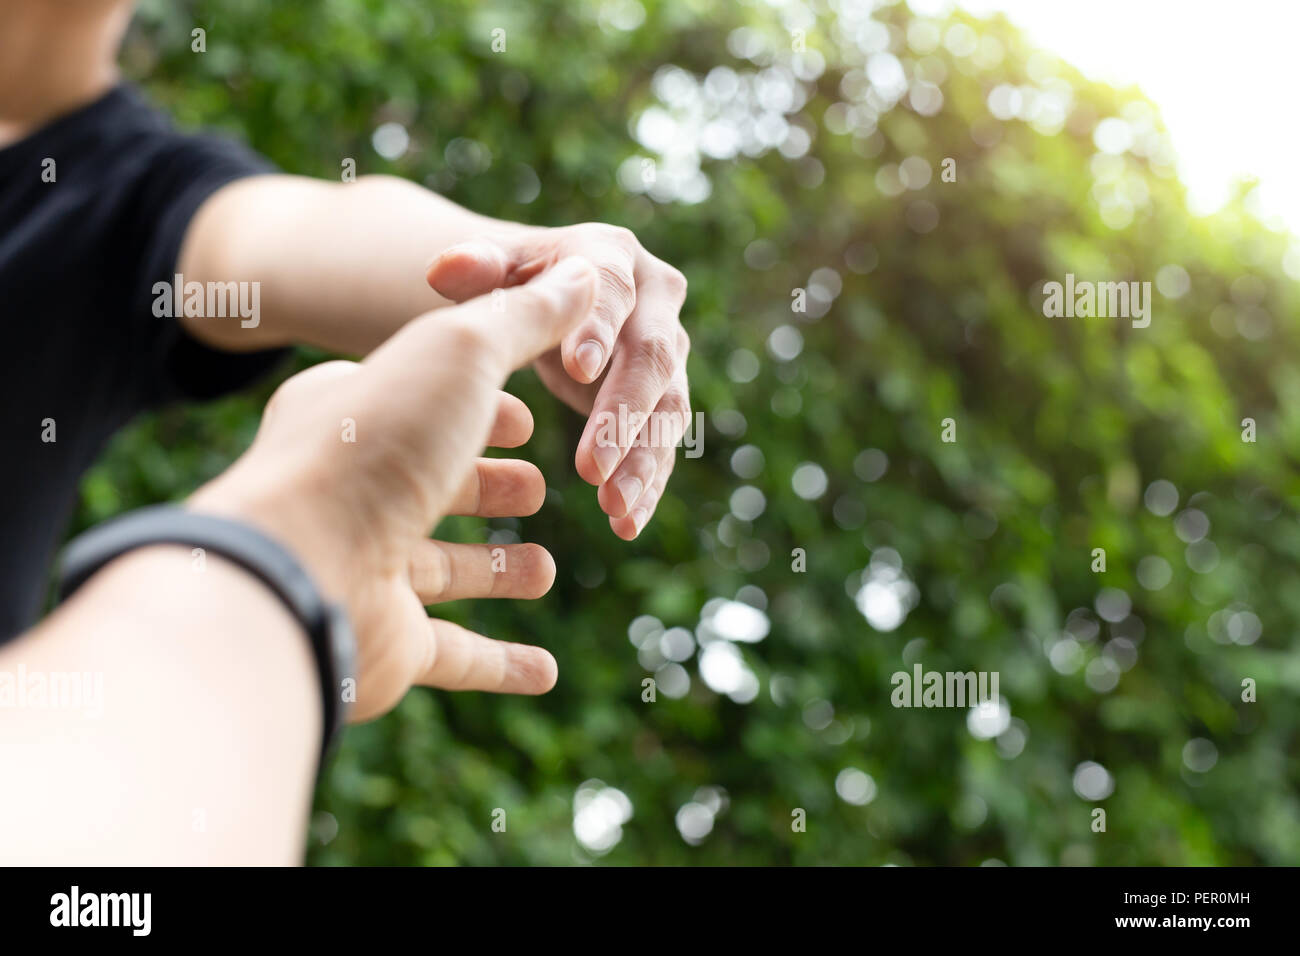 conceptual hand reach out for help with light fare. Stock Photo